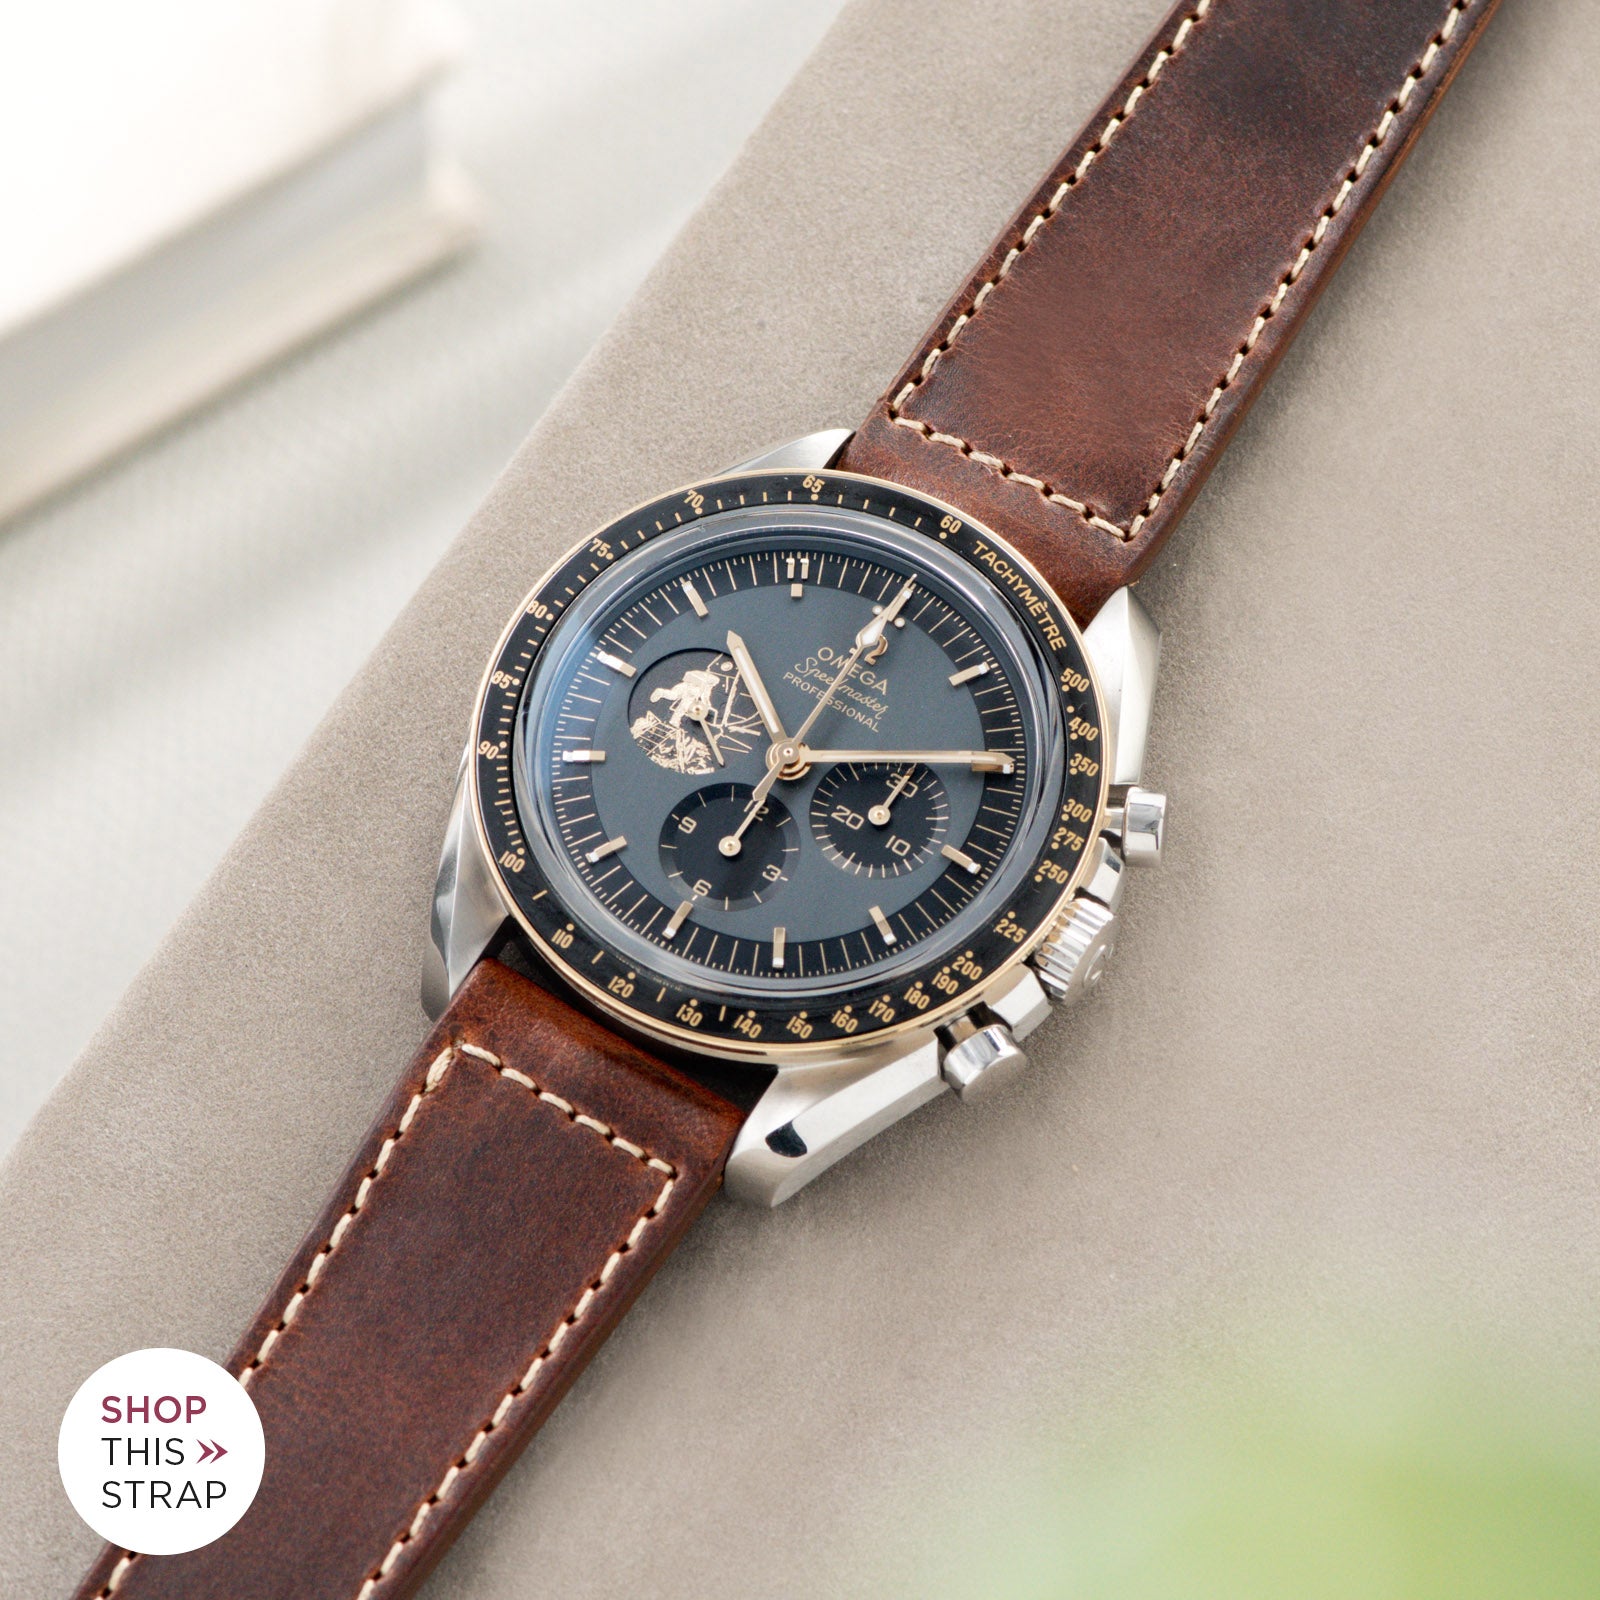 Bulang and Sons_Strap Guide_Omega Speedmaster Apollo 11 50TH Anniversary Watch_Siena Brown Boxed Stitch Leather Watch Strap